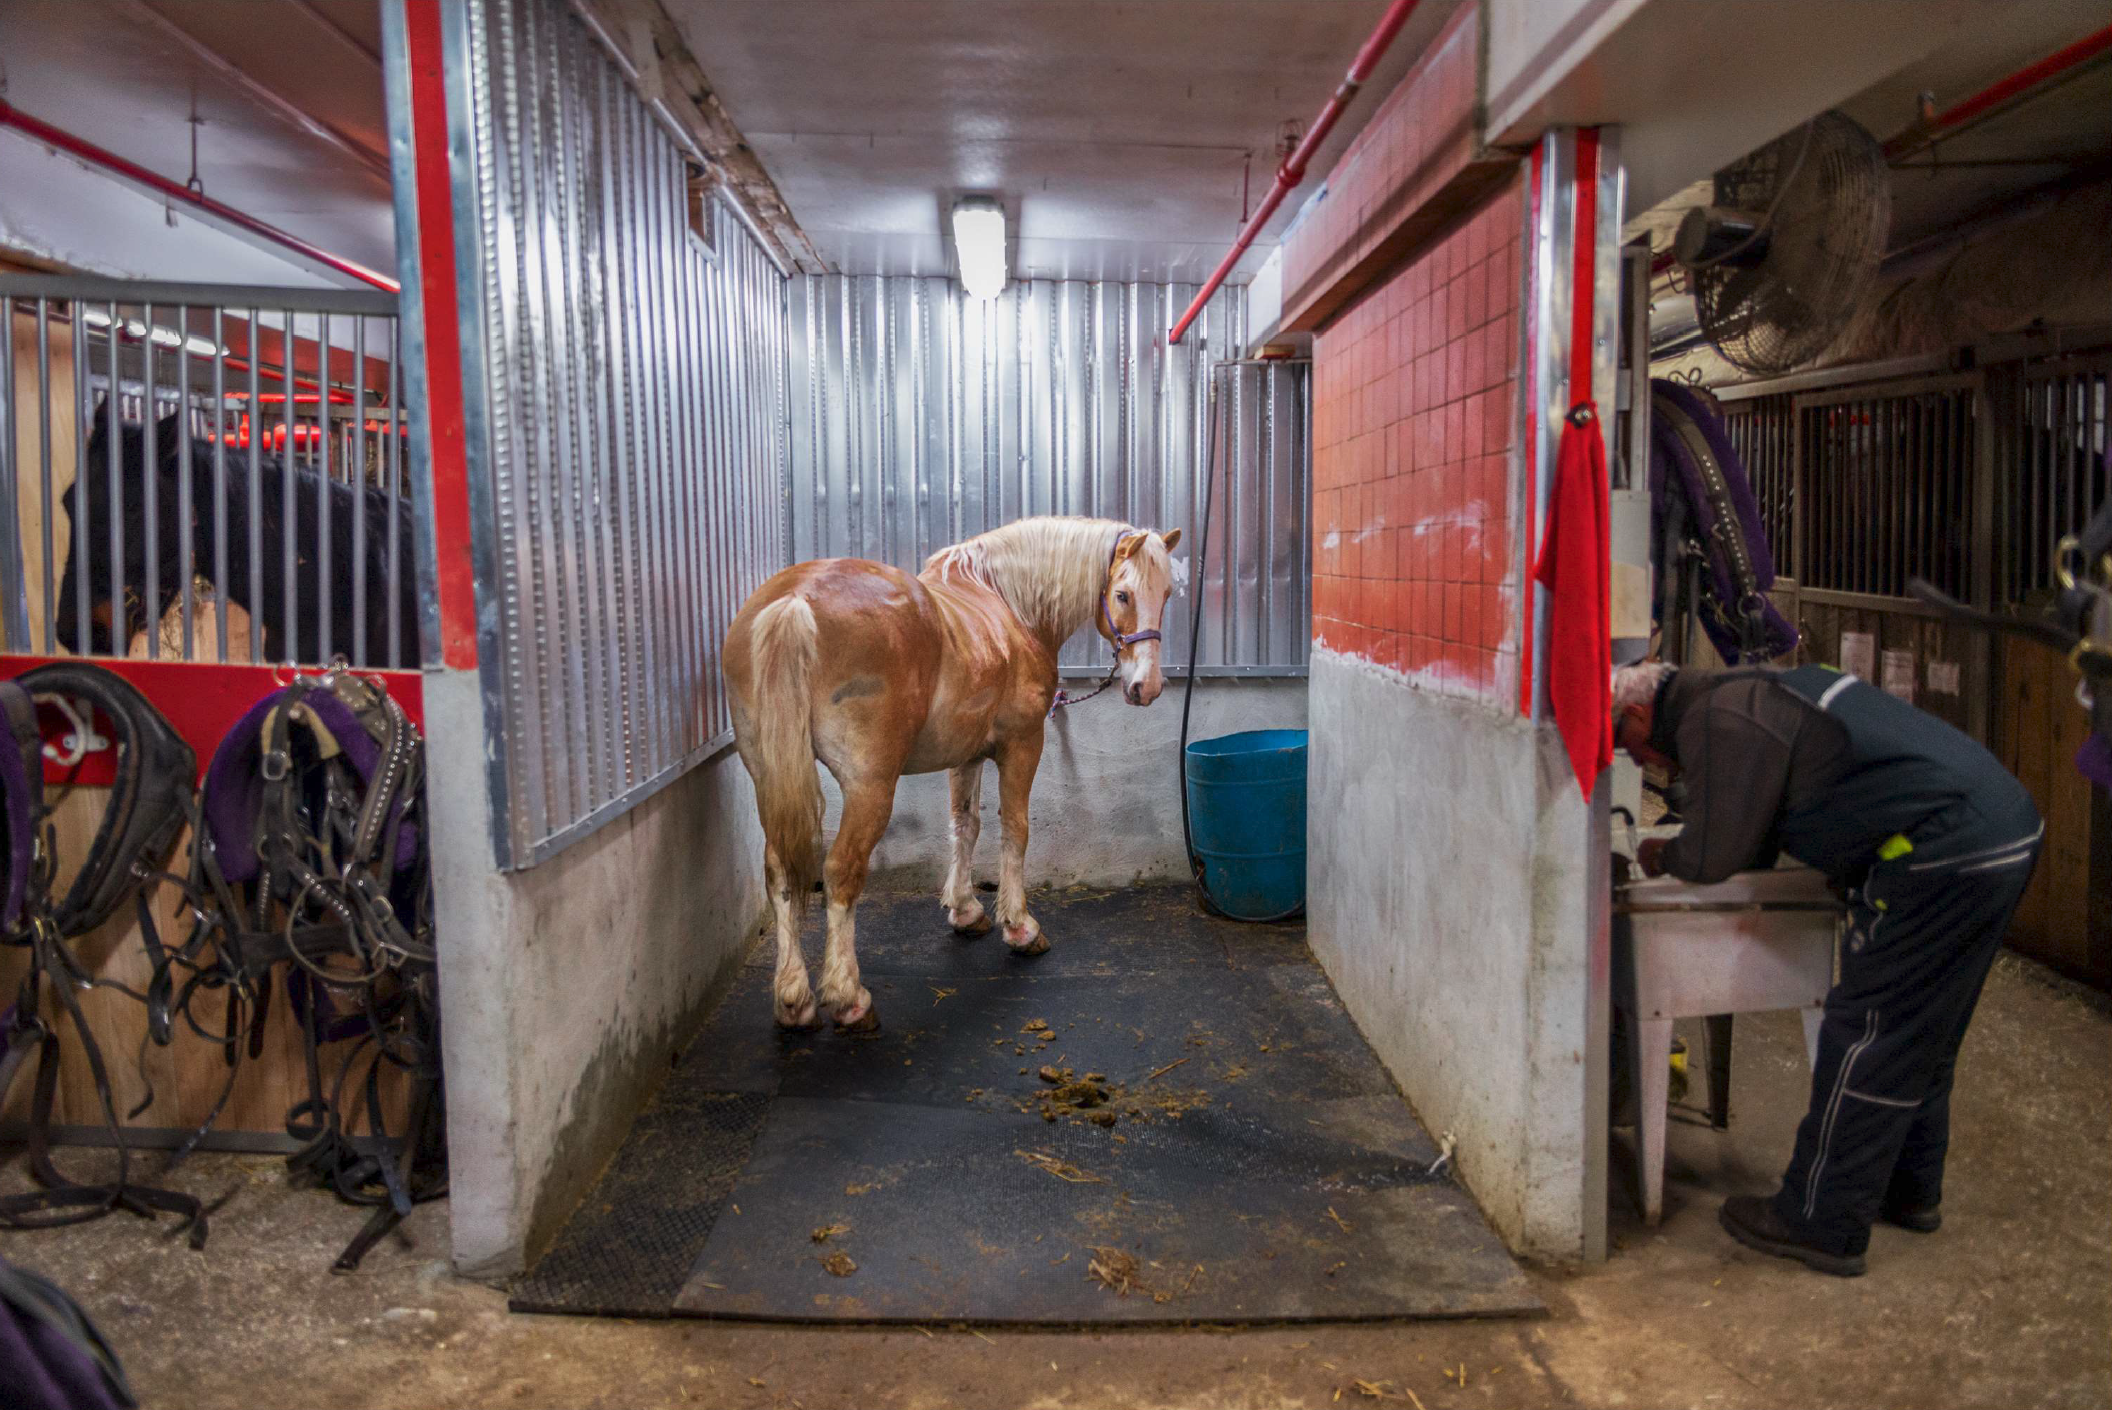  A horse waits to be washed in Clinton Park Stable, New York, February 2019.  Built in 1880 to host the city's sanitation department horses, the stable is the house of 64 carriage horses. The first floor is devoted to parking carriages while the seco